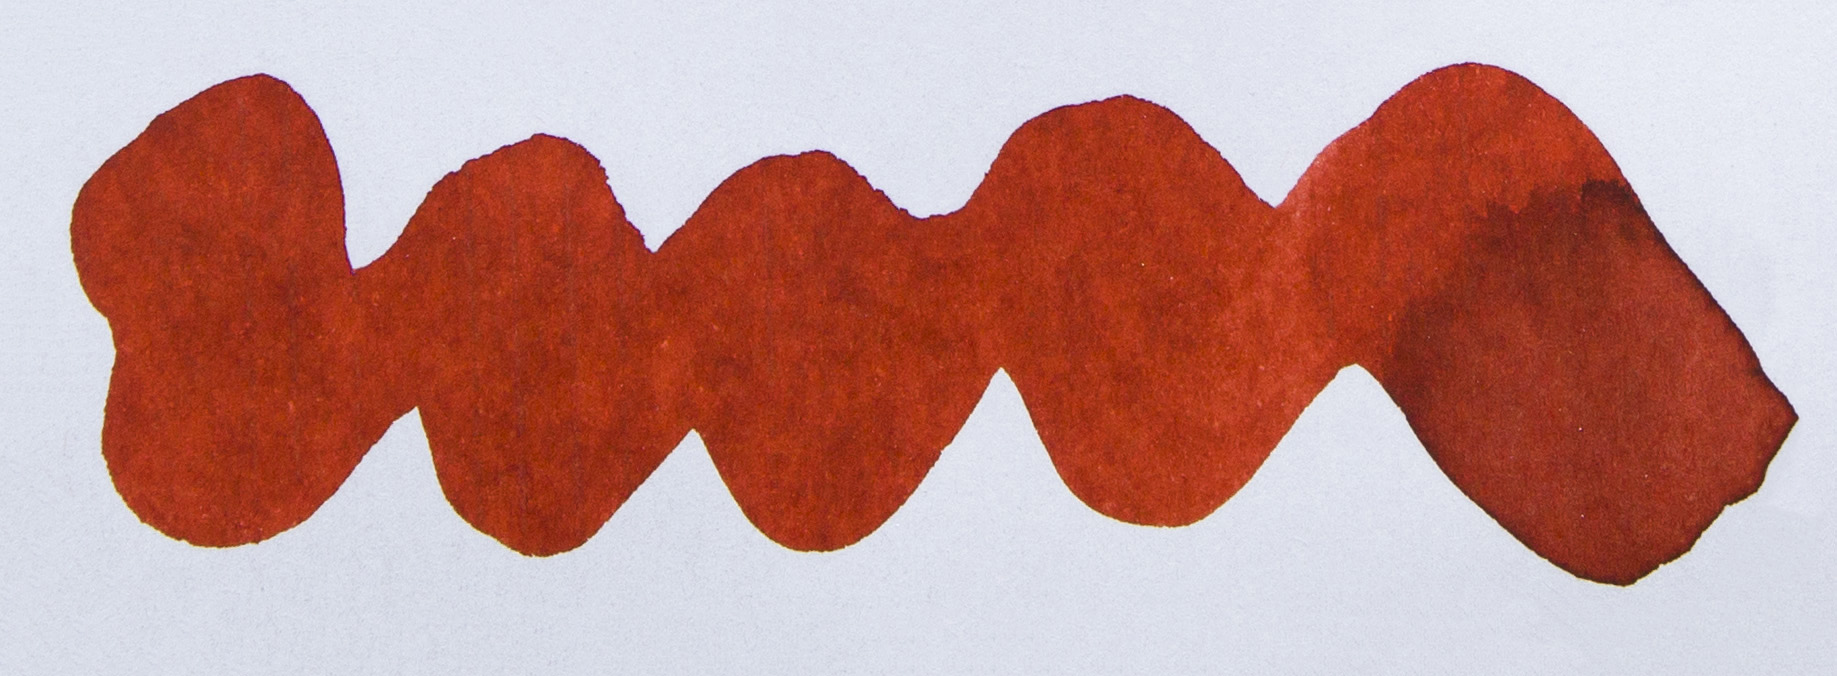 Diamine Inkvent Red Edition - Red Robin Ink Sample 2ml 